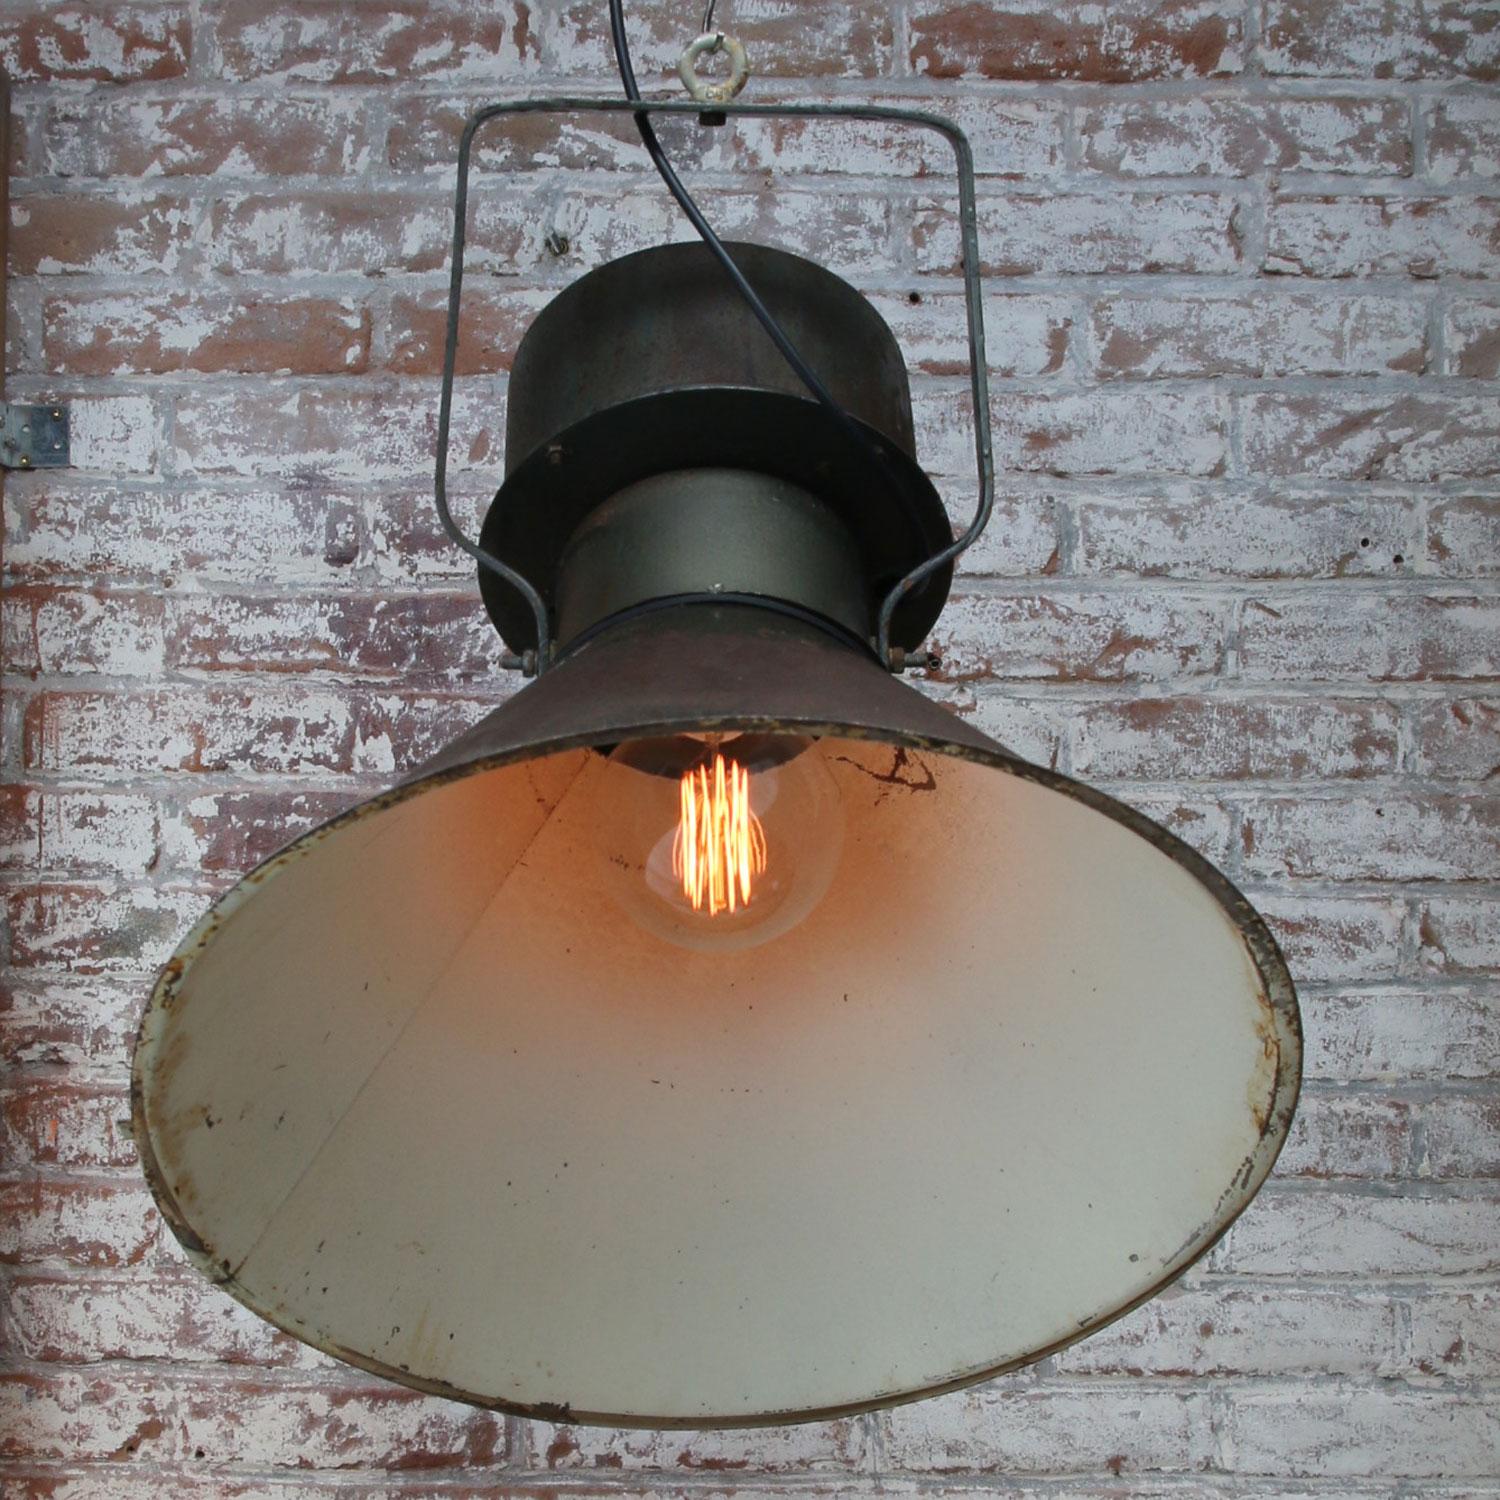 Industrial pedant light spot light.
Green rust metal with rotatable arm

Weight: 4.50 kg / 9.9 lb

Priced per individual item. All lamps have been made suitable by international standards for incandescent light bulbs, energy-efficient and LED